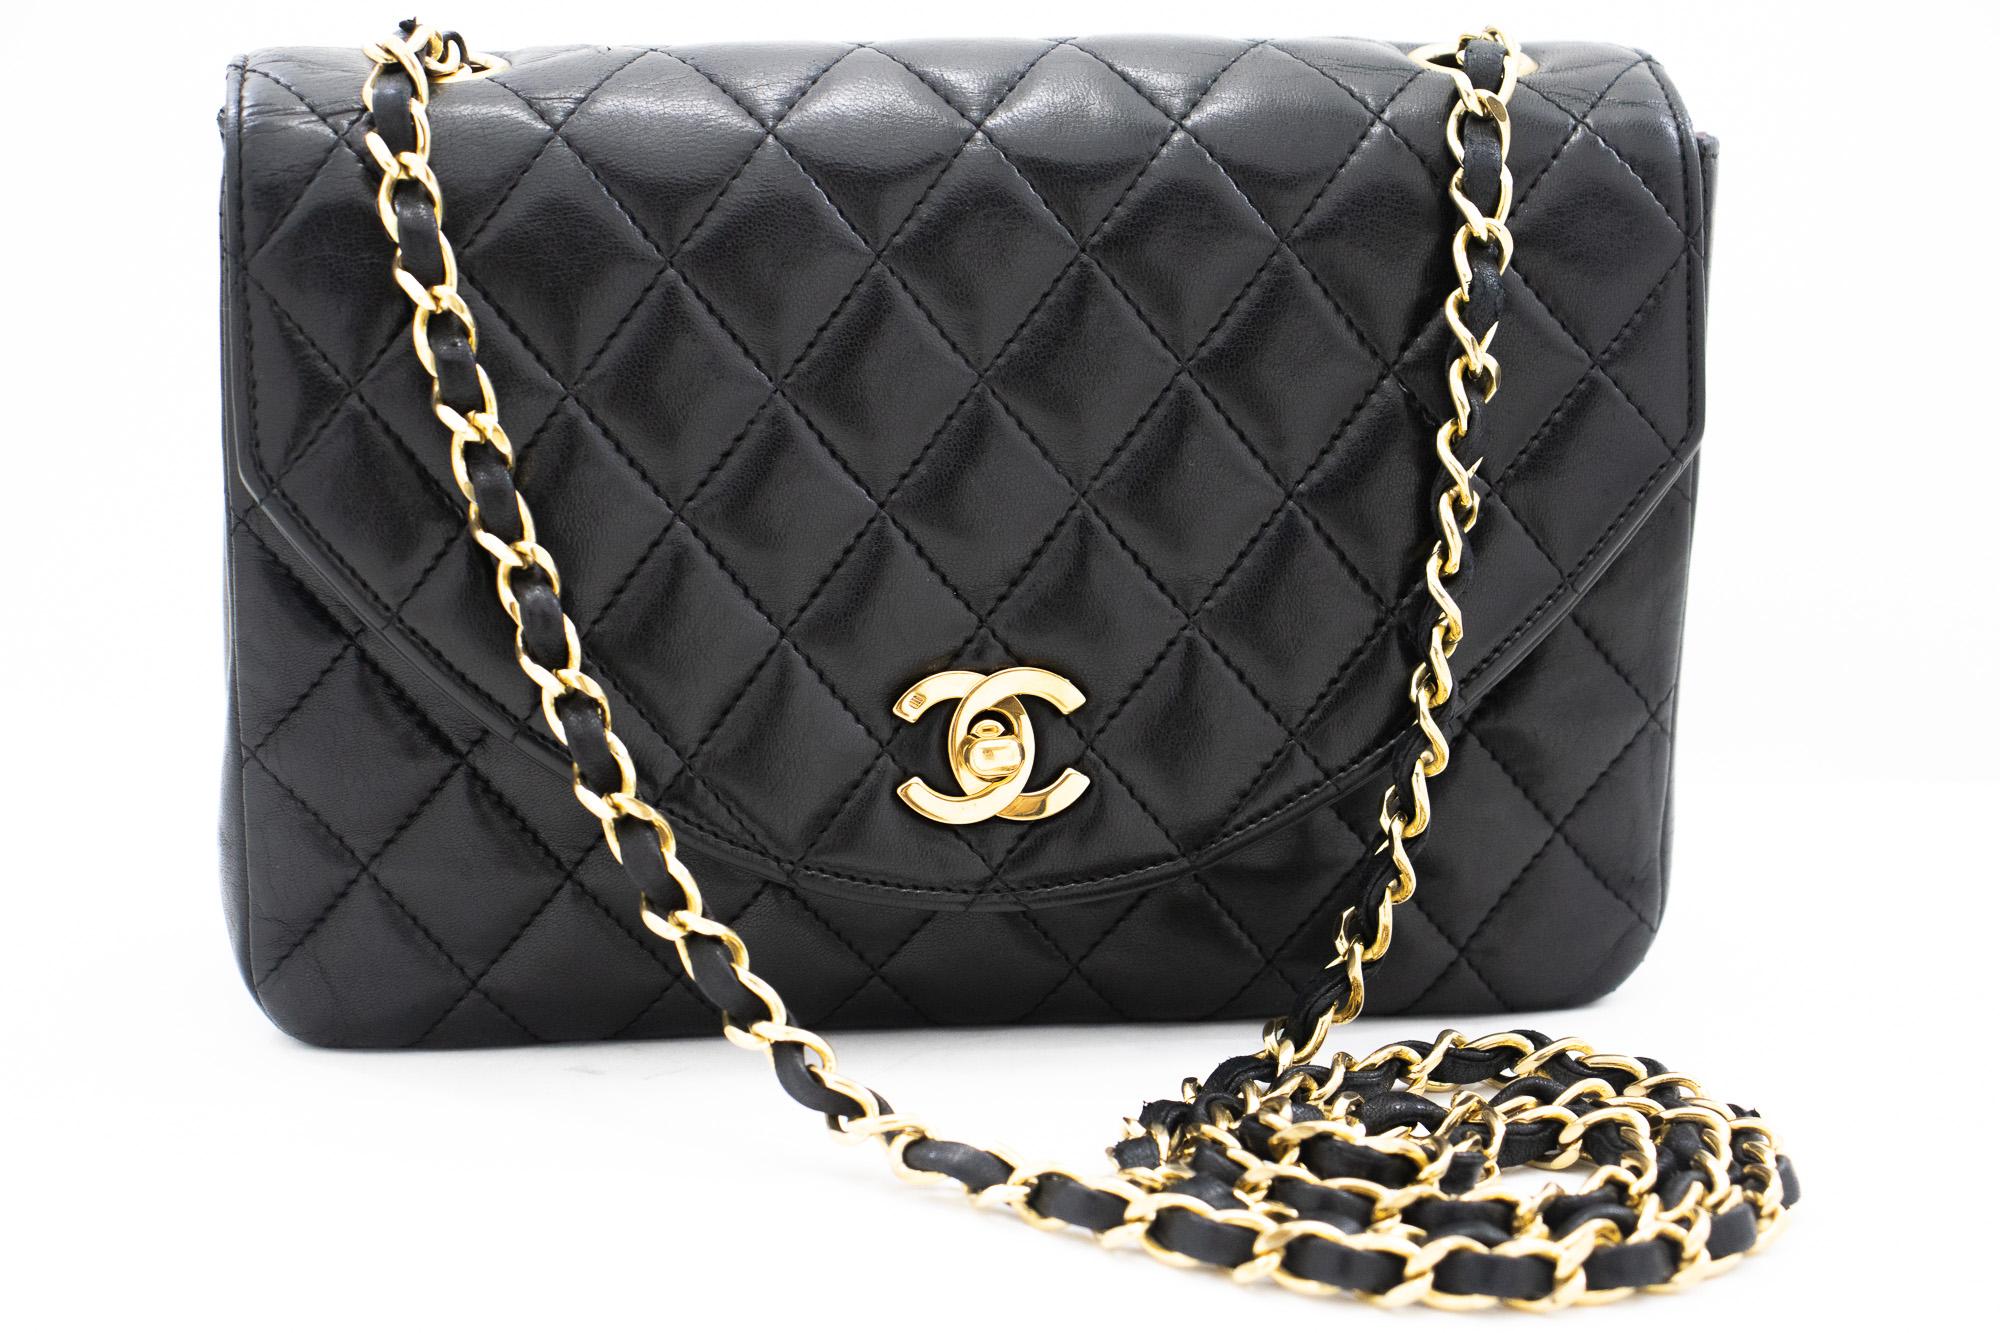 An authentic CHANEL Half Moon Chain Shoulder Bag Crossbody Black Quilted Flap. The color is Black. The outside material is Leather. The pattern is Solid. This item is Vintage / Classic. The year of manufacture would be 1989-1991.
Conditions &